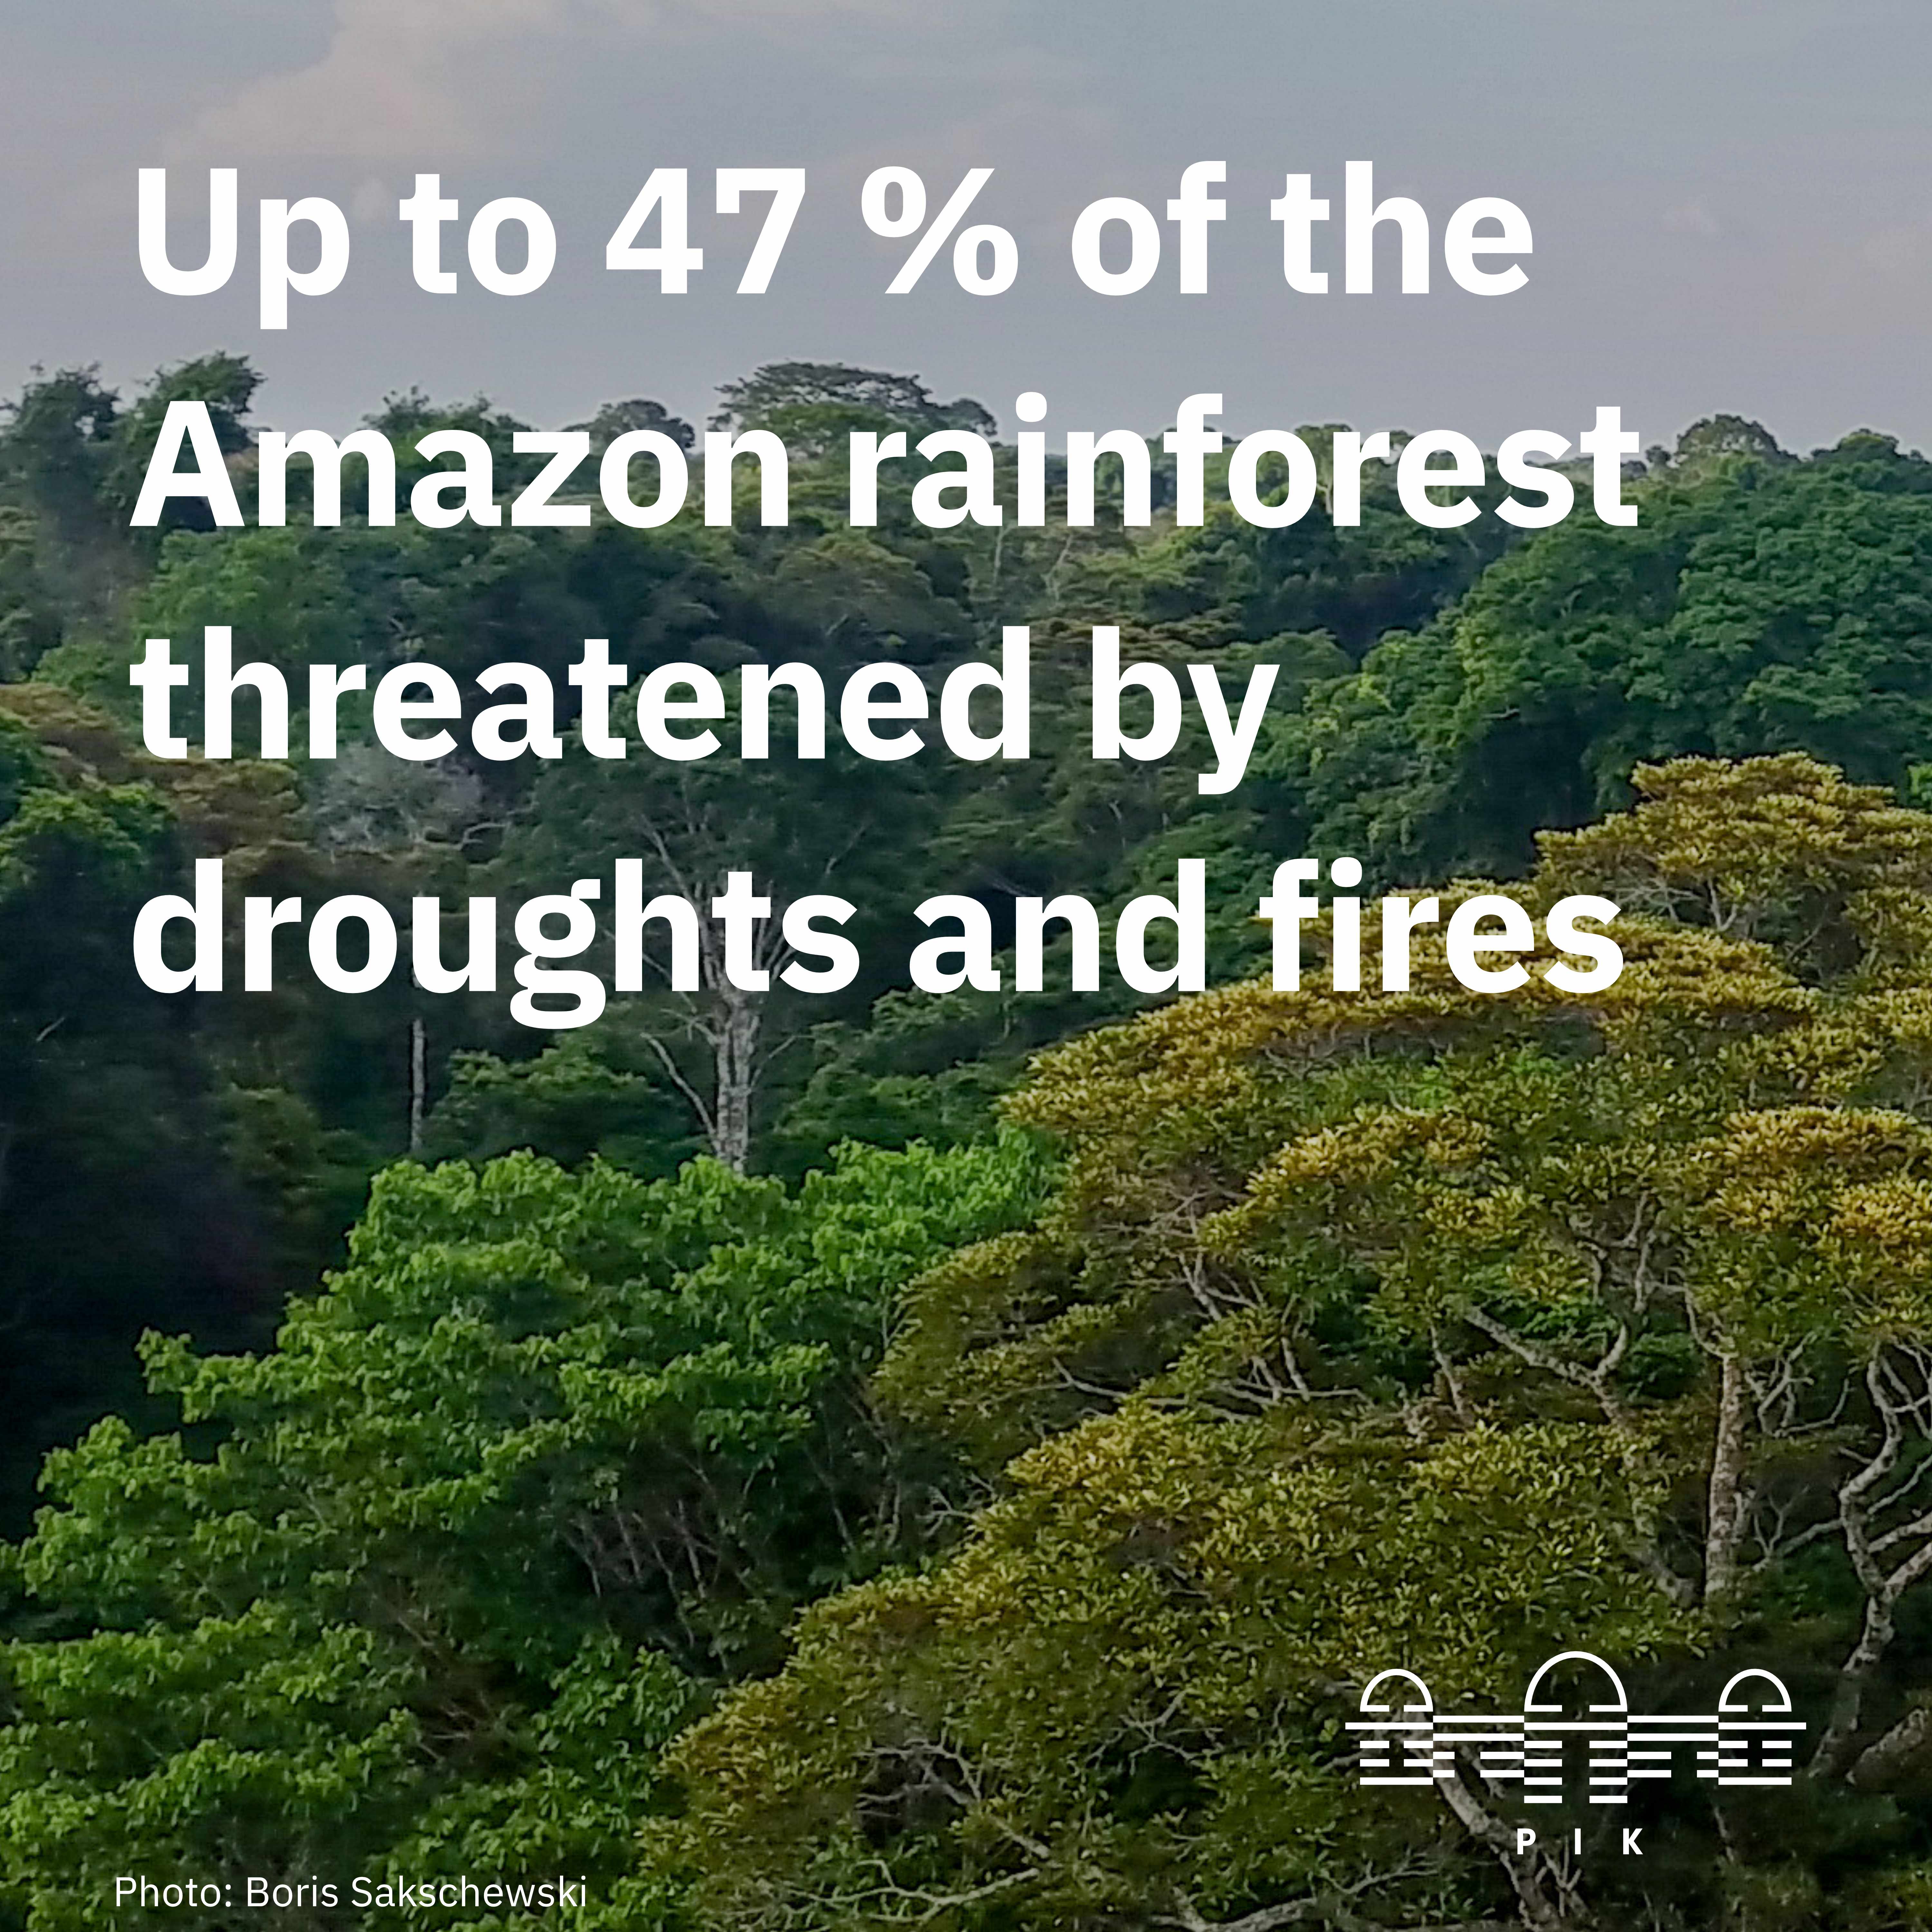 Up to 47 percent of the Amazonian forest is threatened